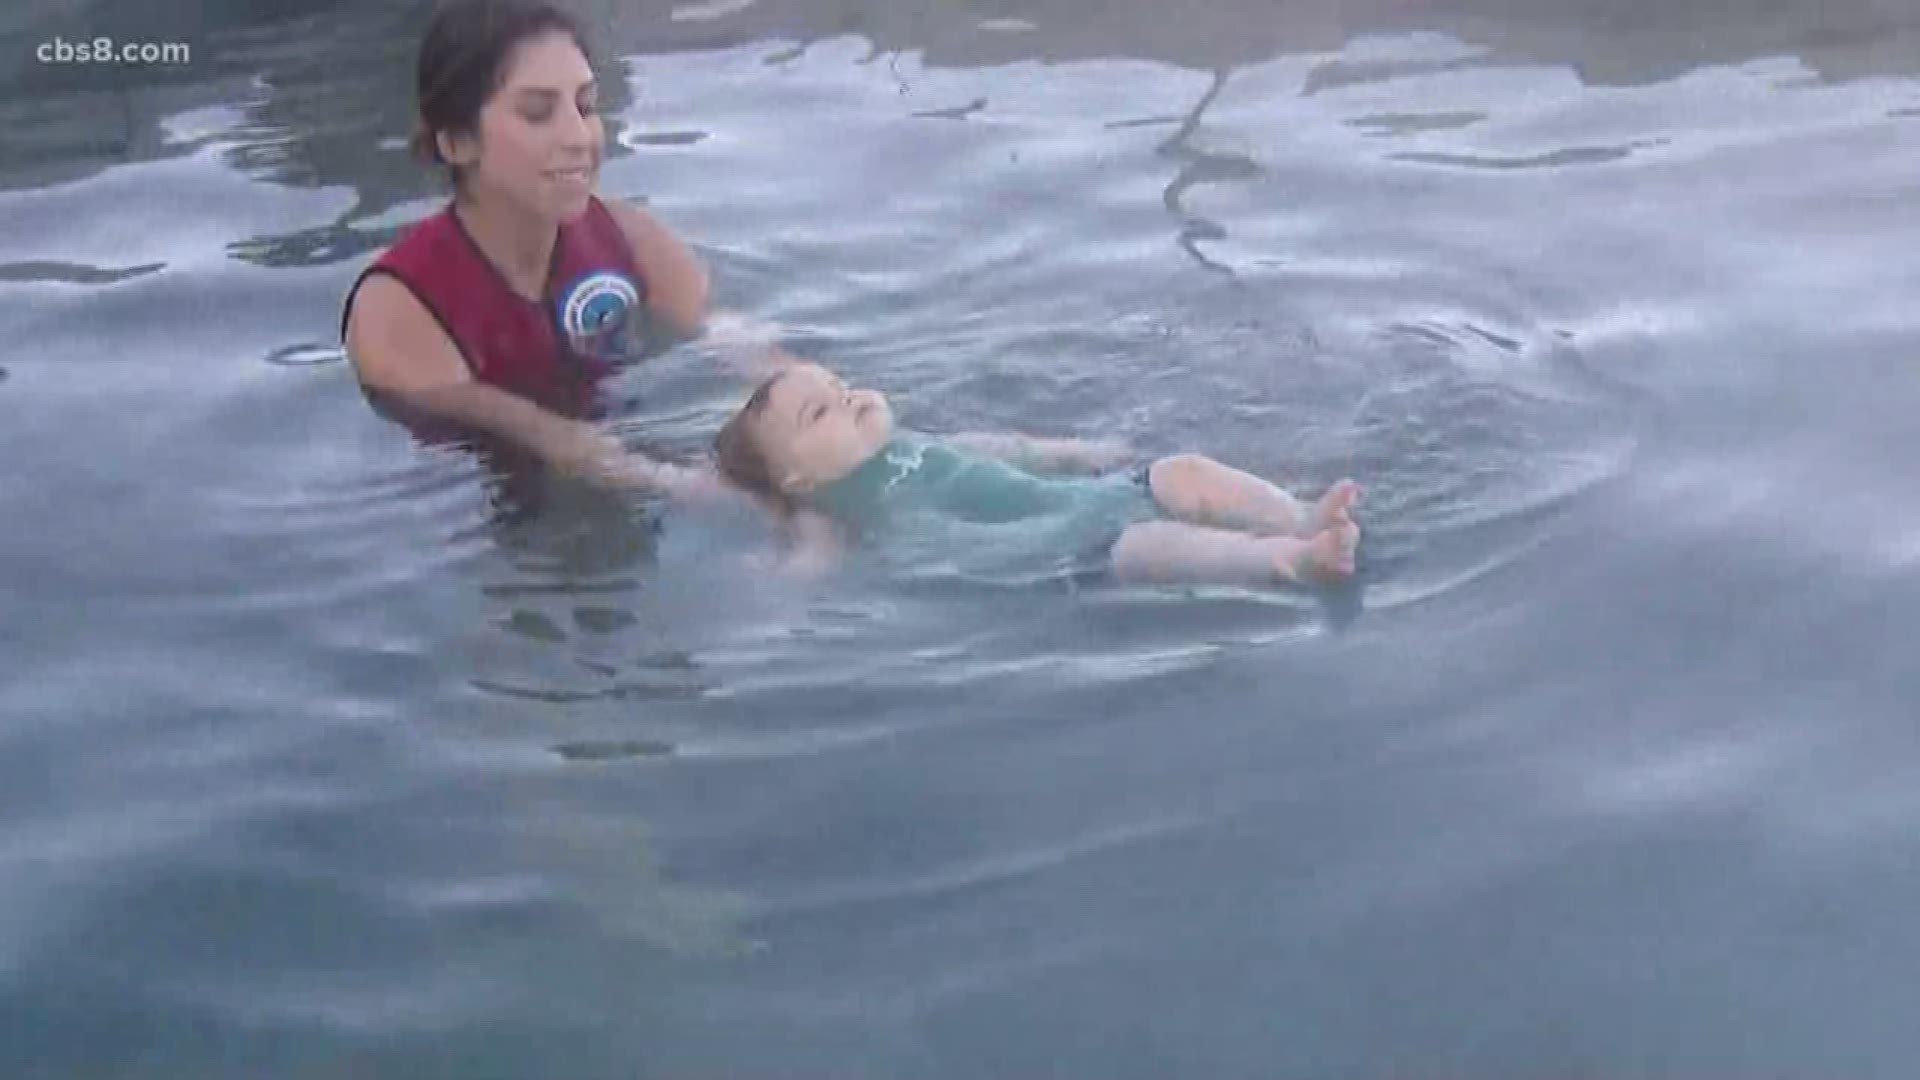 Survival Swim uses the Swim-Float-Swim method to teach kids as young as 6-months old to swim on their own.